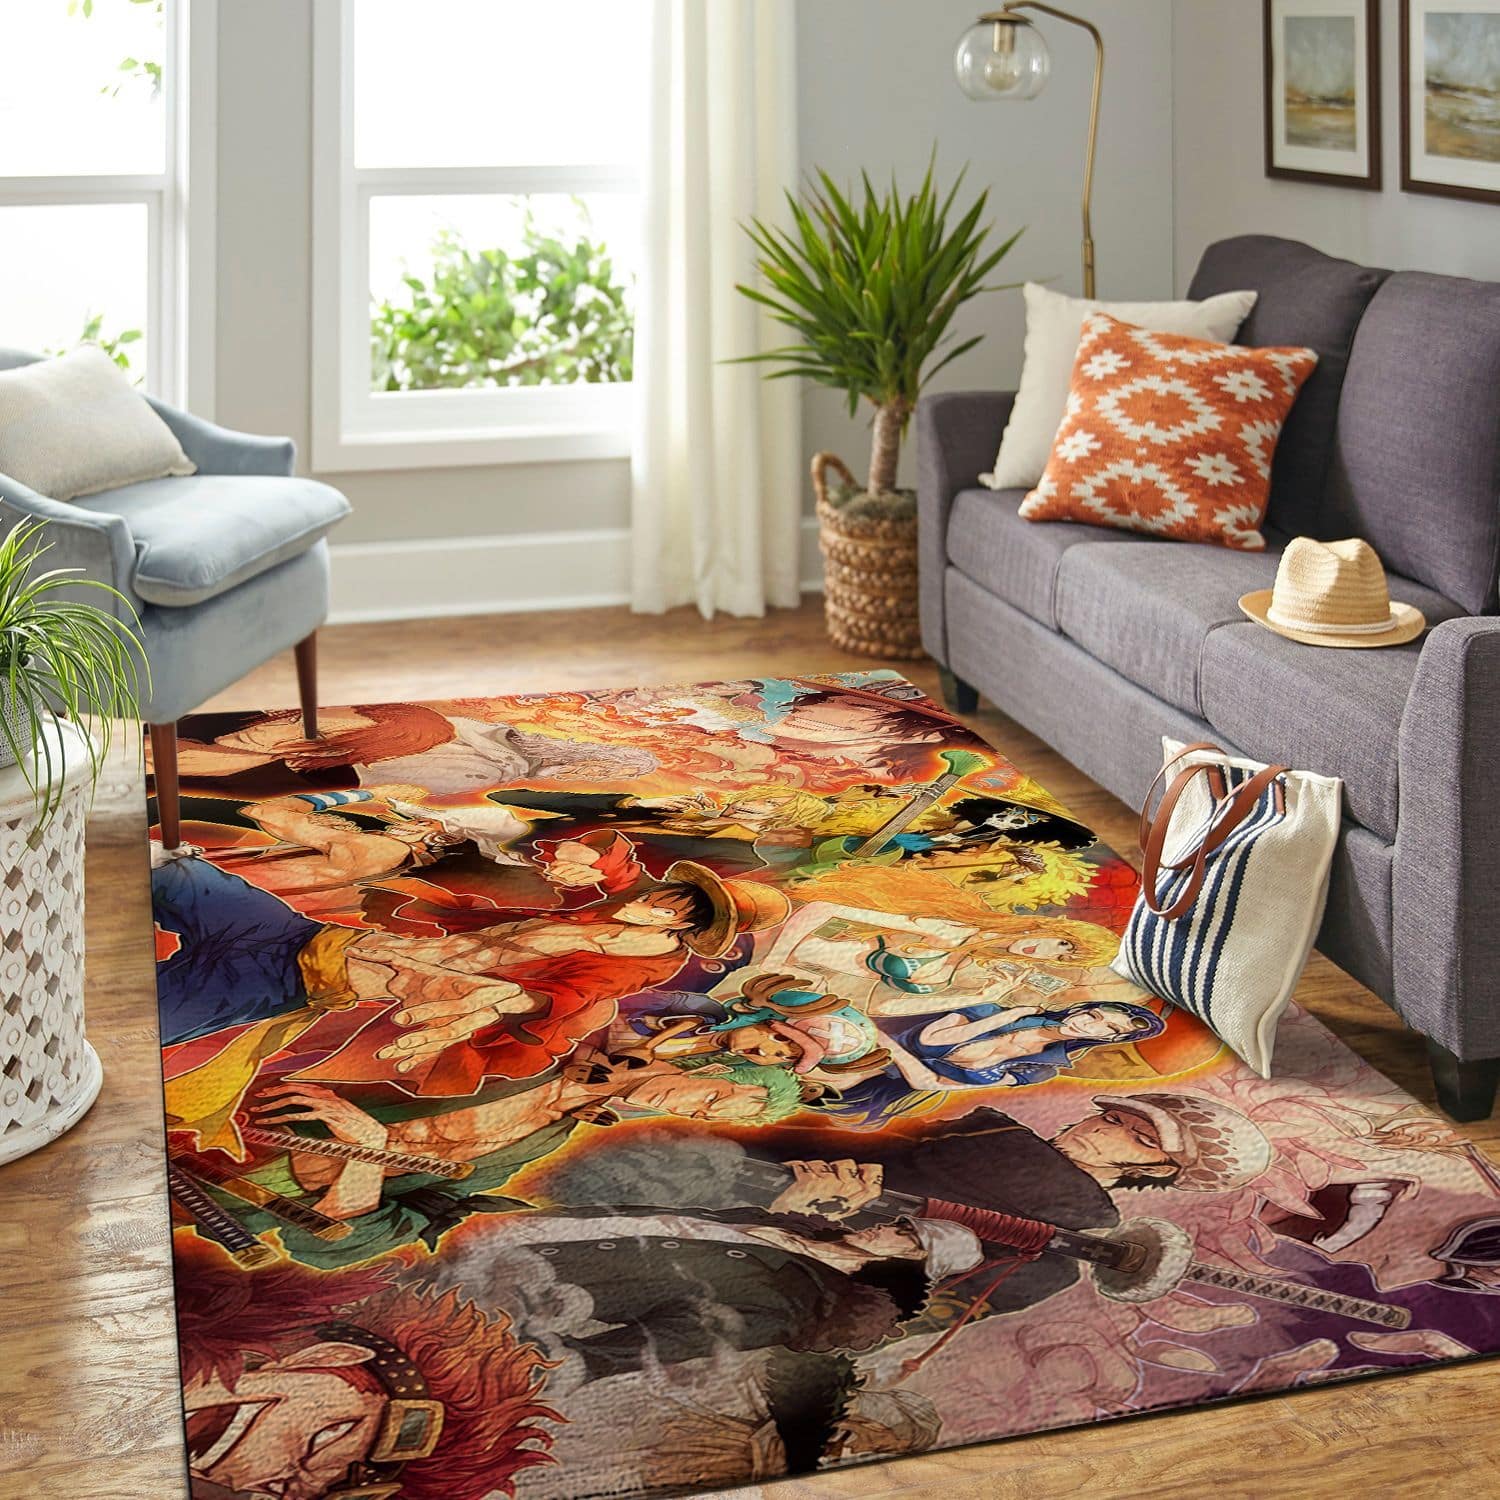 Amazon Onepiece-Luffy Living Room Area No6435 Rug